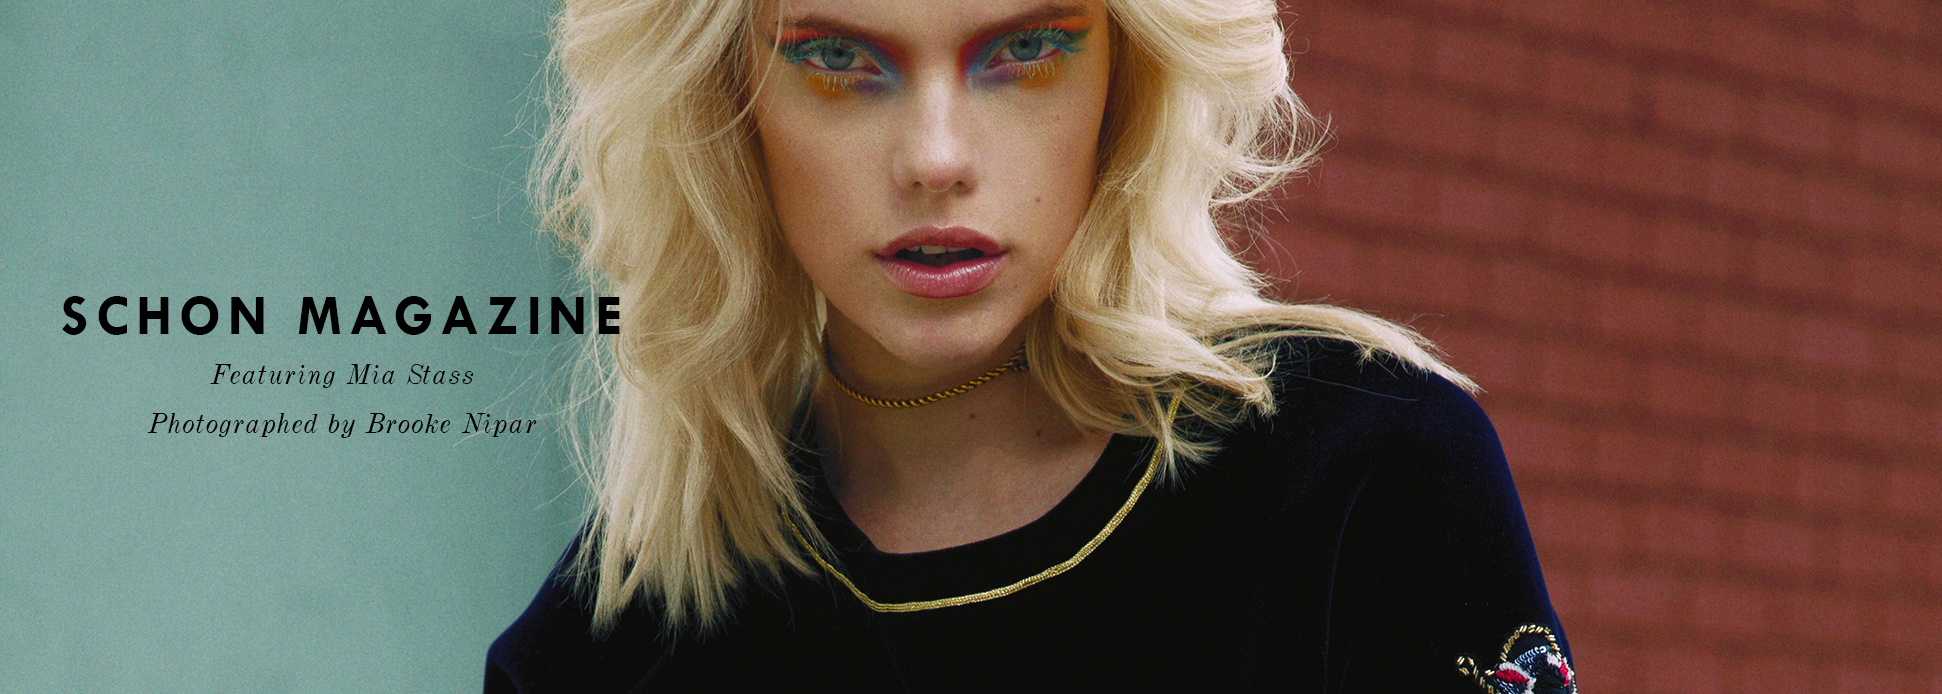 MIA_STASS_SCHON_MAGAZINE_STYLED BY ANDREA MESSIER CUOMO 3.jpg